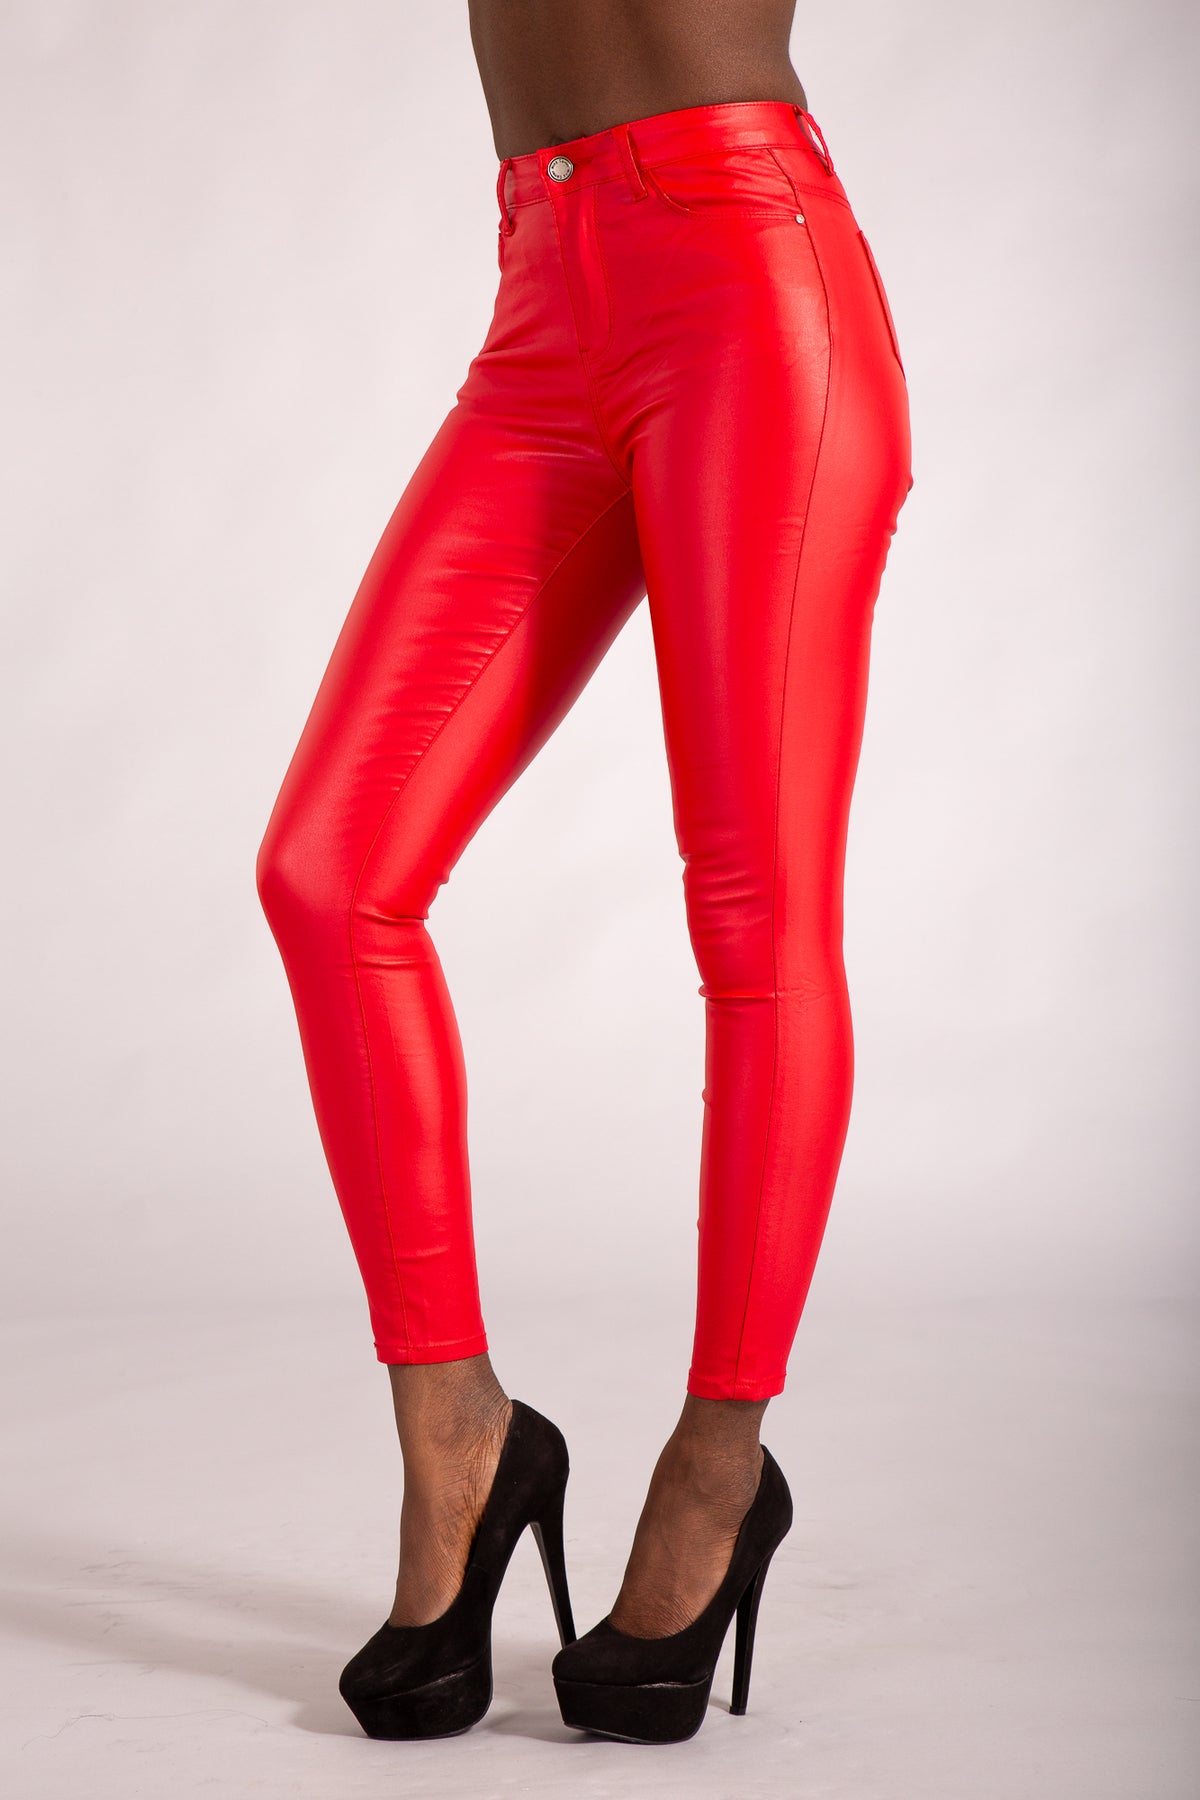 Kandy Red Leather Look Leggings From Denim Crush Lusty Chic 